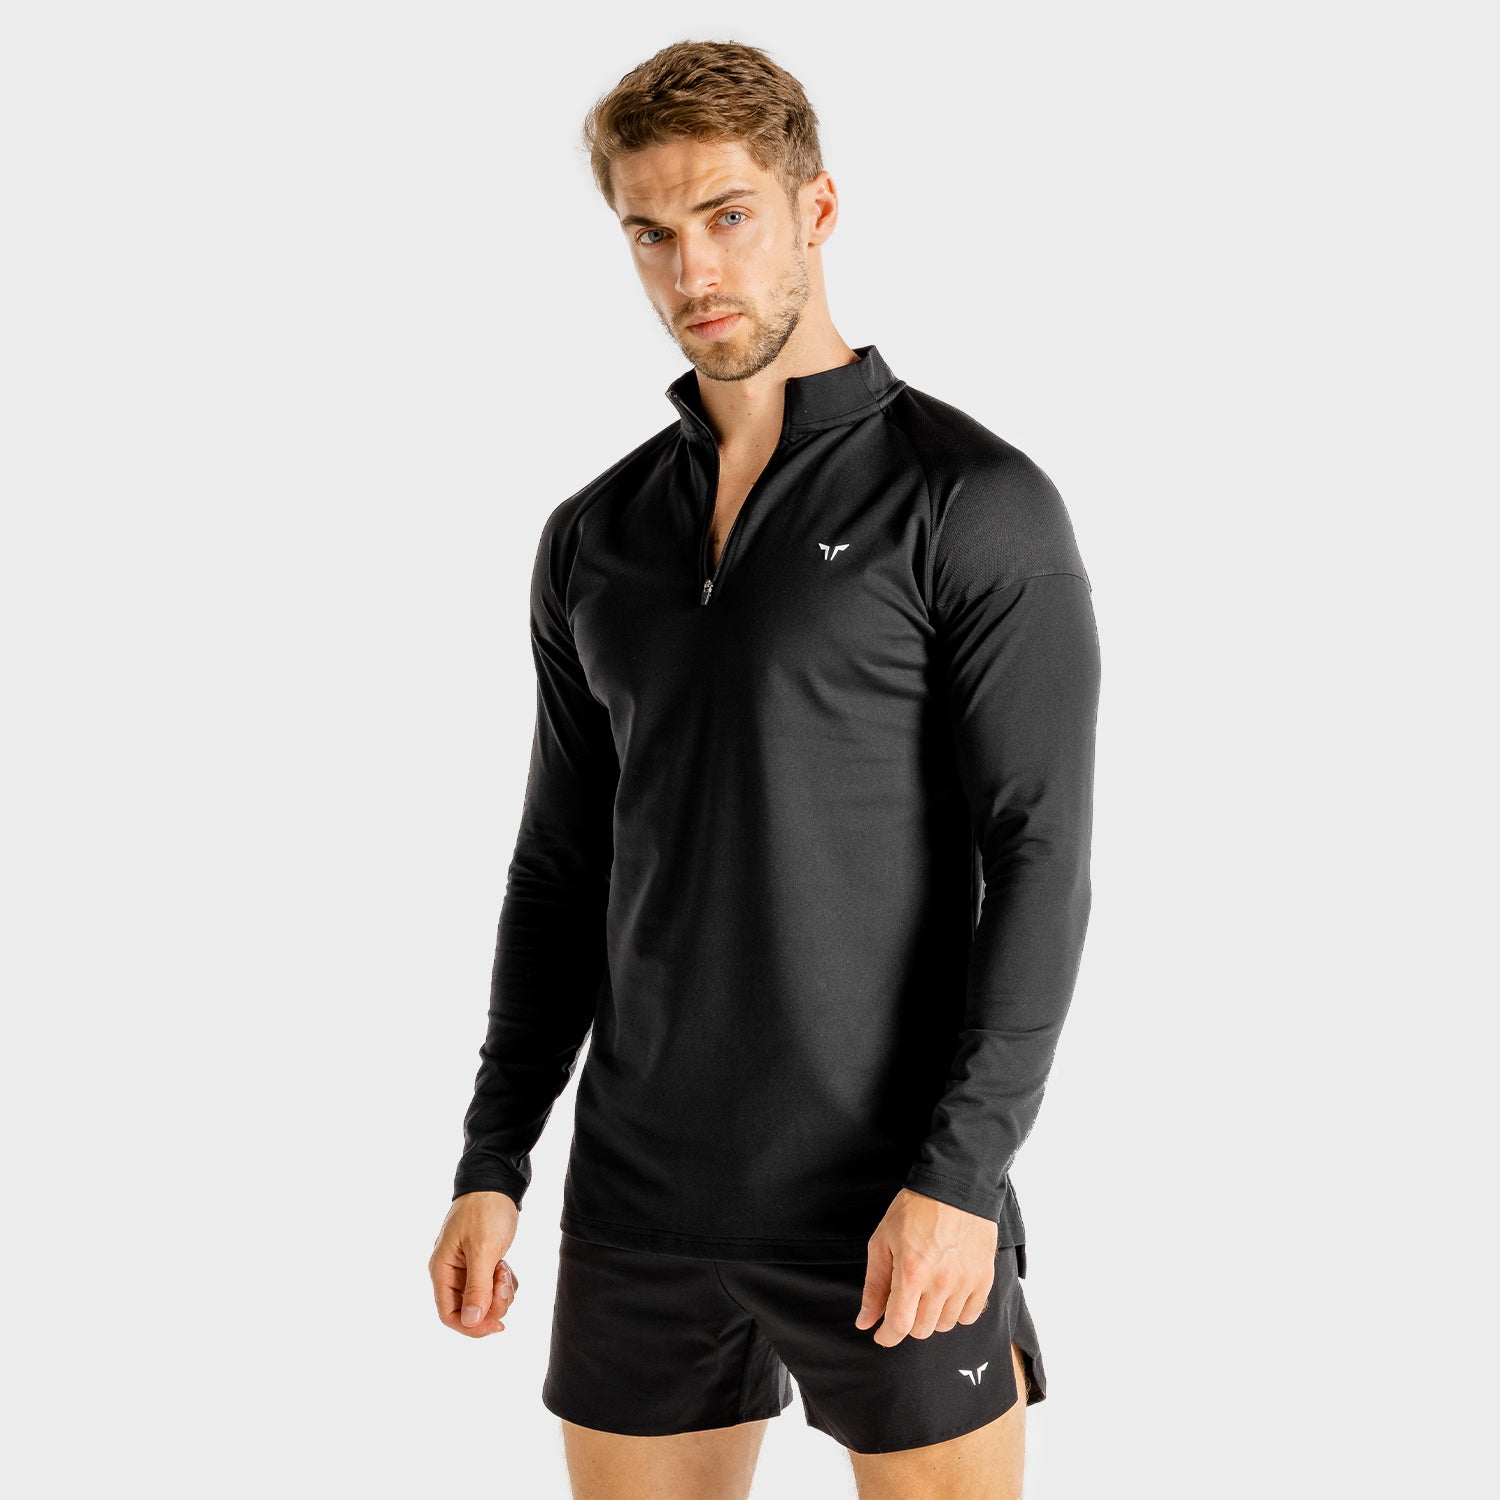 squatwolf-workout-shirts-for-men-core-running-top-black-long-sleeve-gym-wear